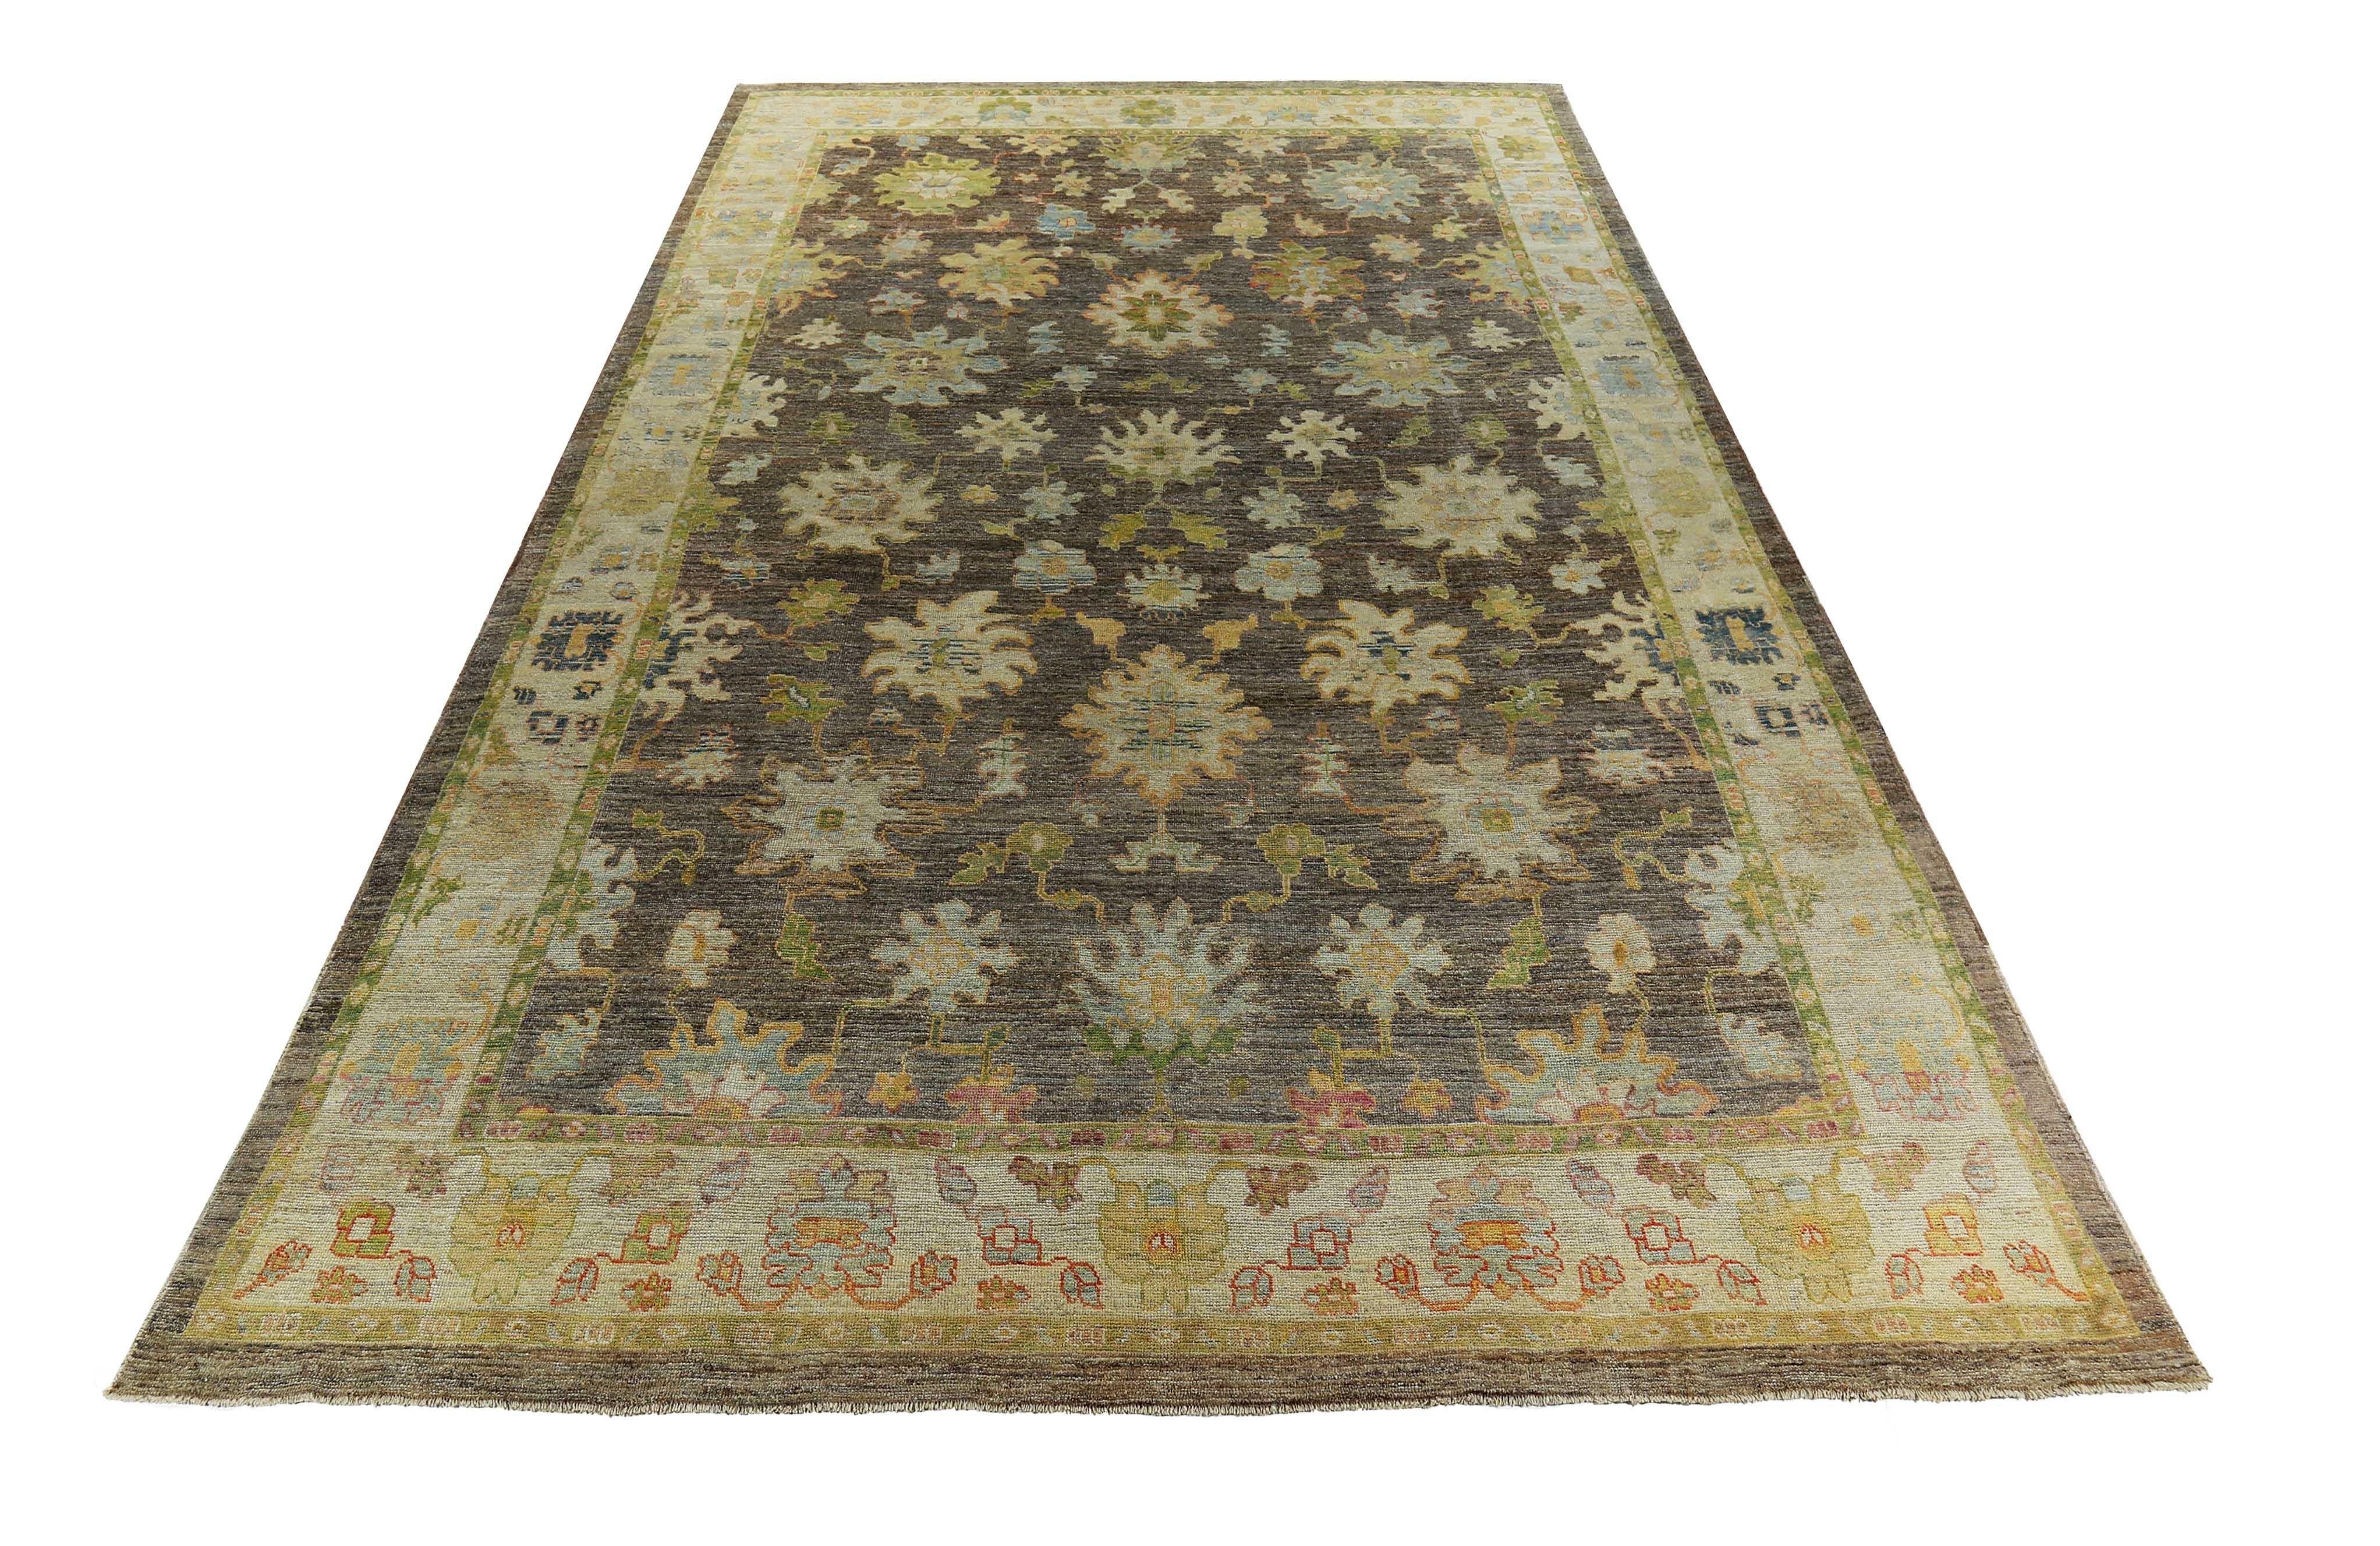 New Turkish rug made of handwoven sheep’s wool of the finest quality. It’s colored with organic vegetable dyes that are certified safe for humans and pets alike. It features green and blue floral details on a lovely brown and ivory field. Flower